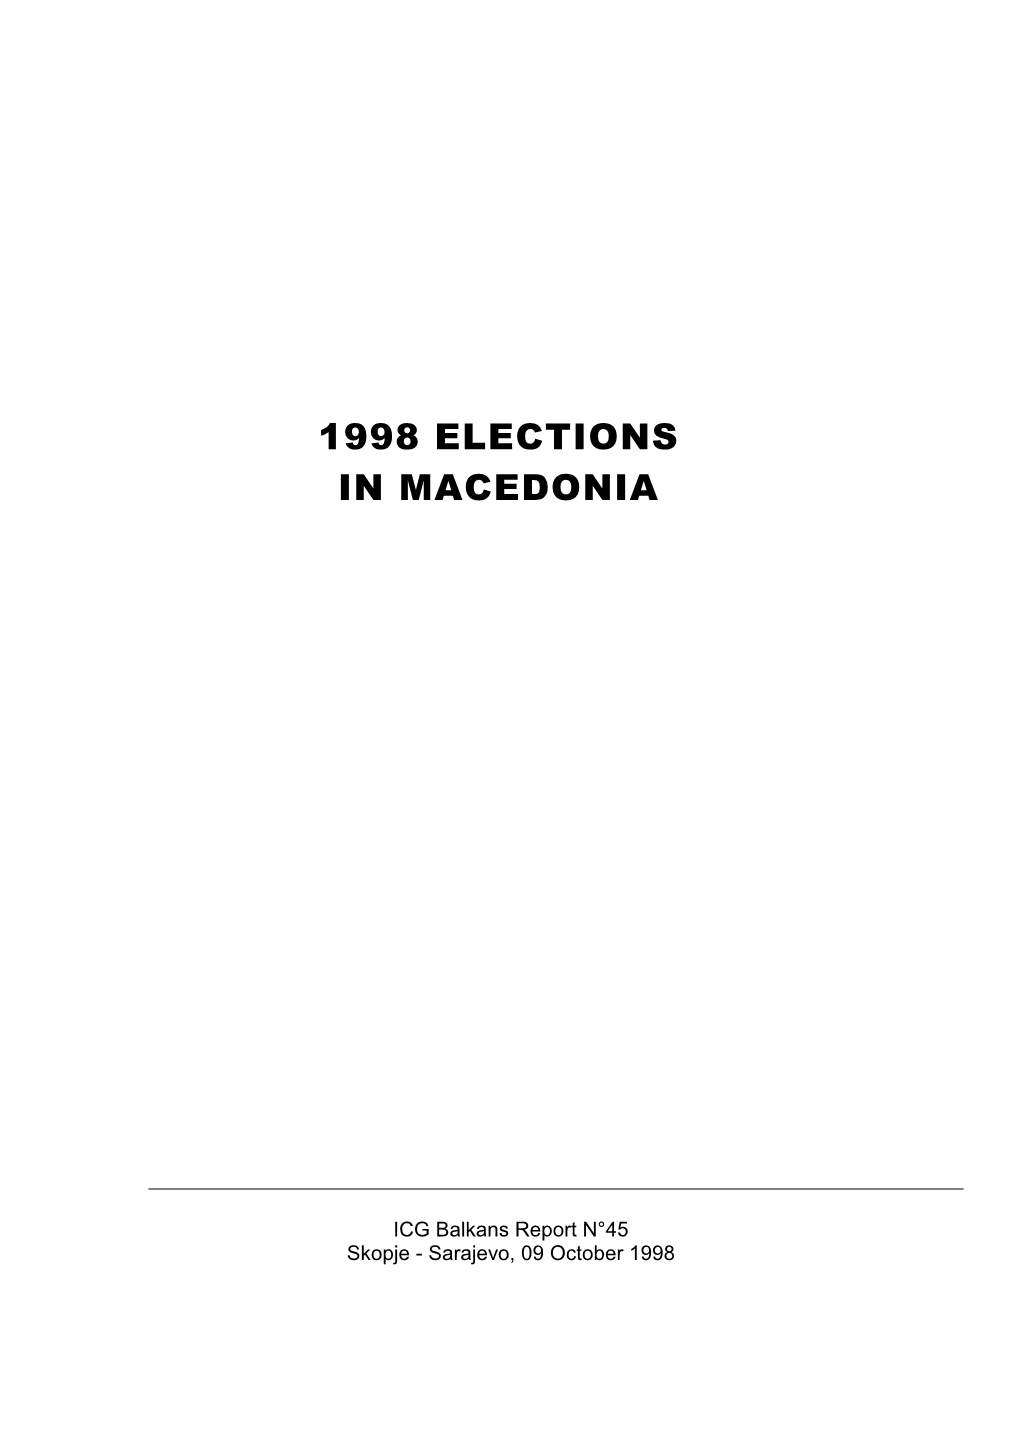 Europe Report, Nr. 45: 1998 Elections in Macedonia